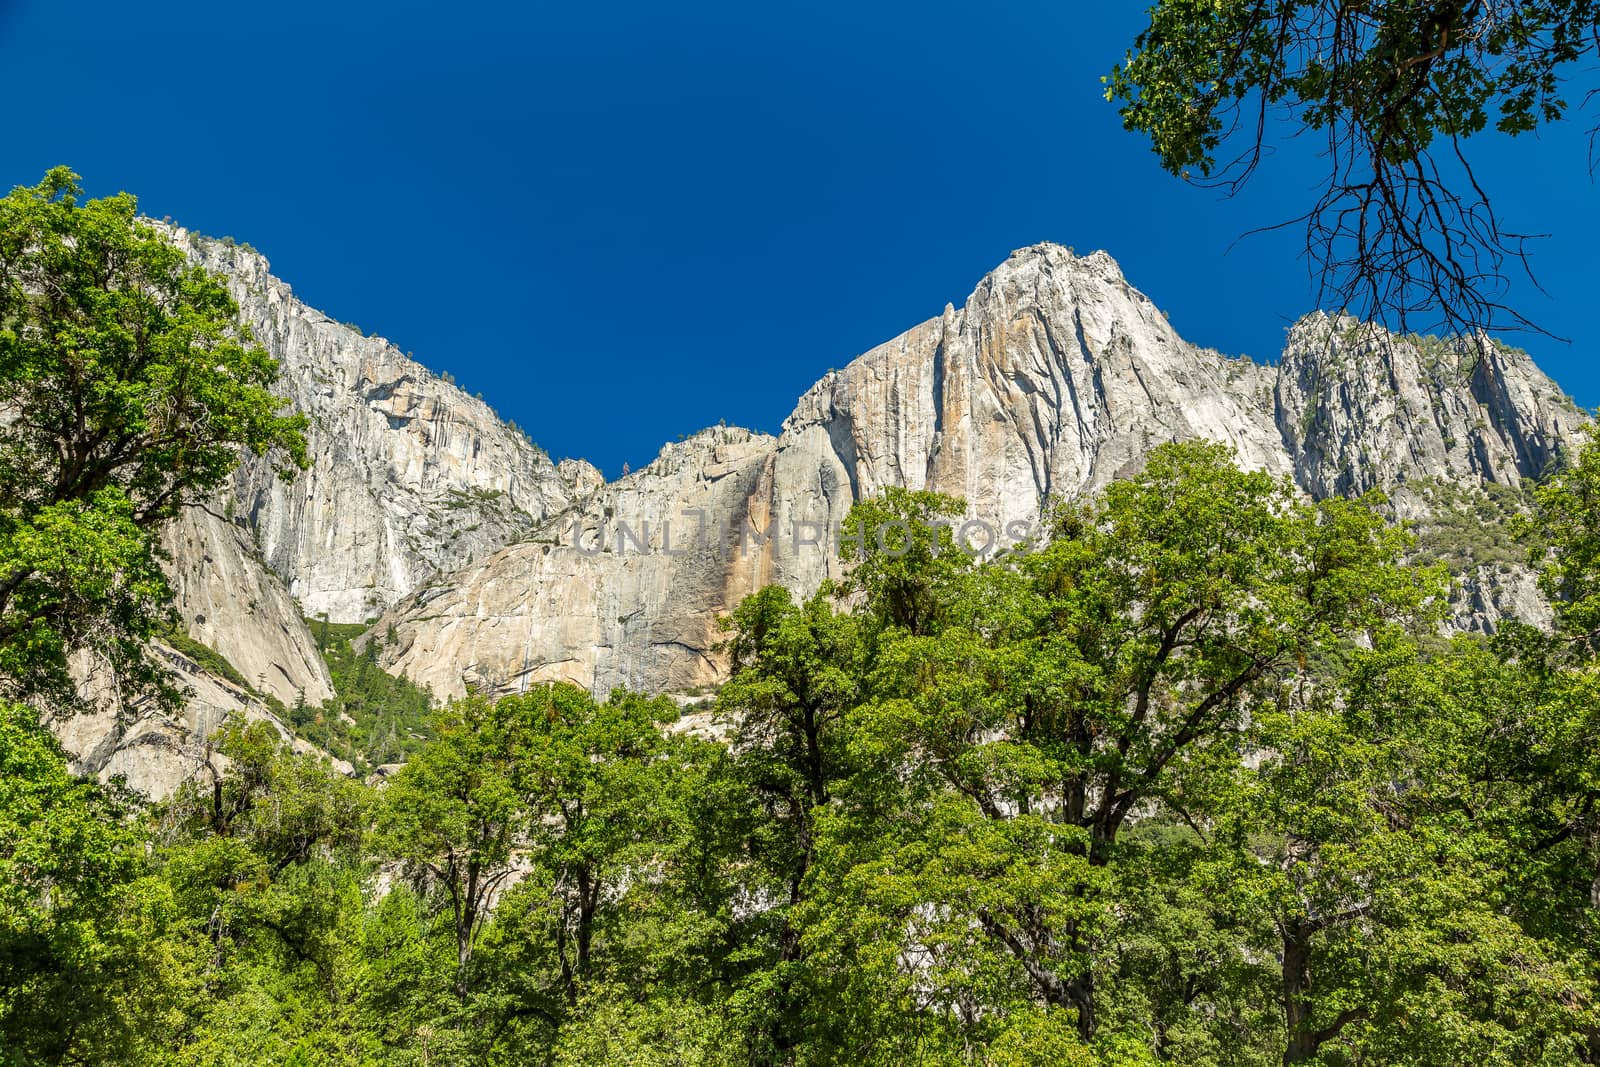 Yosemite Point (6,939 ft.), a mountain cliff, stands to the right of Yosemite Falls and provides unobstructed views of the Yosemite Valley area.